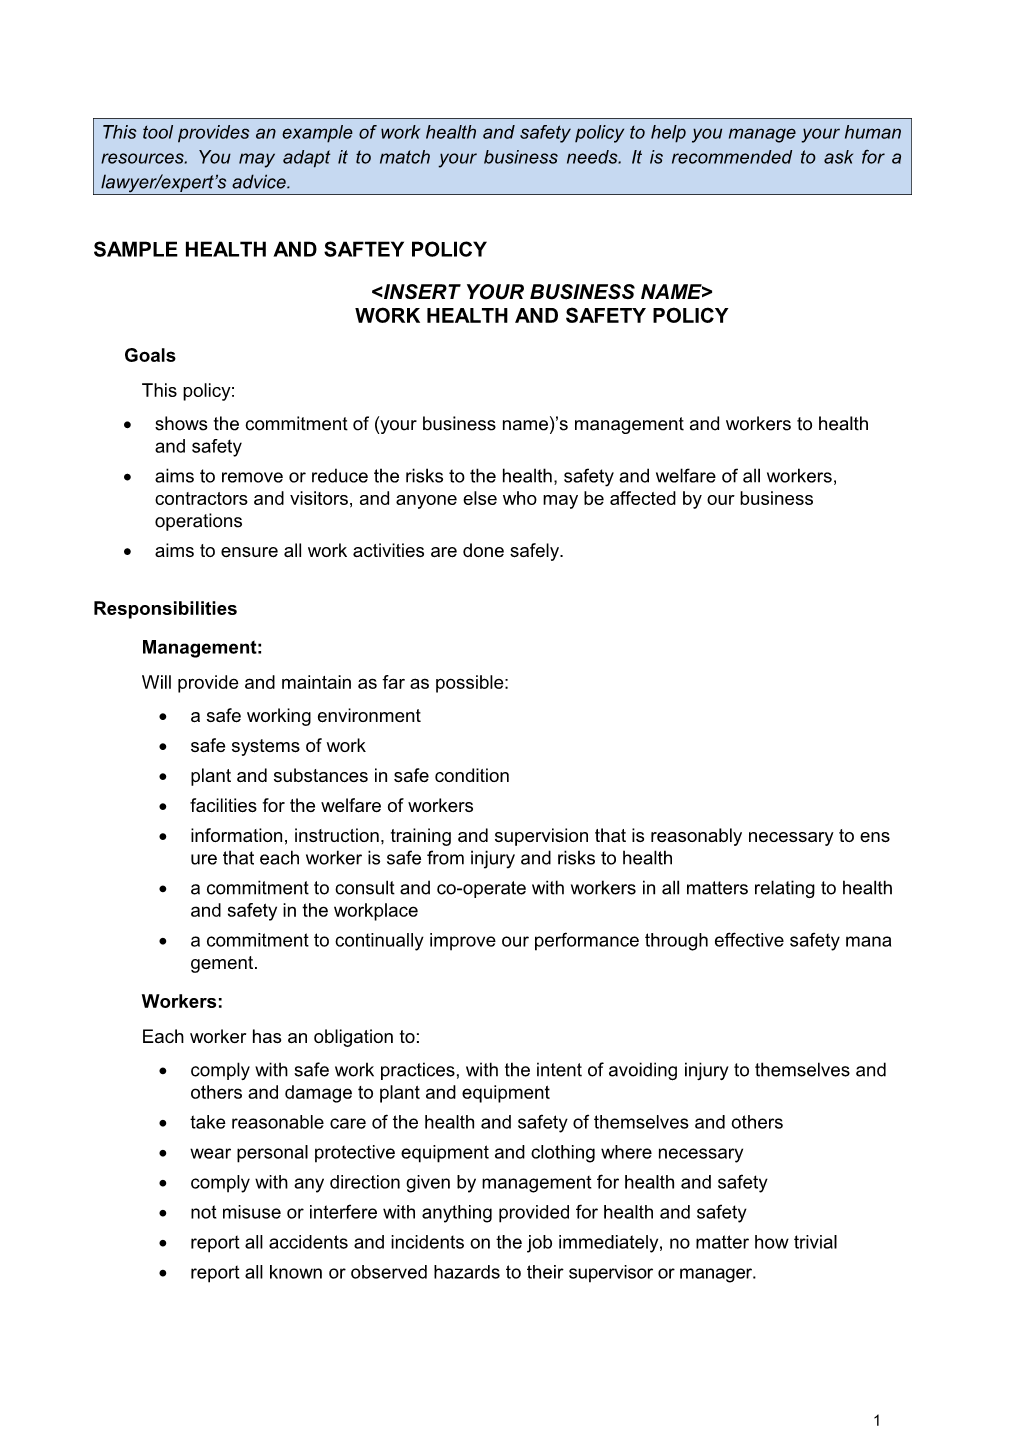 Work Health and Safety Policy - Samples